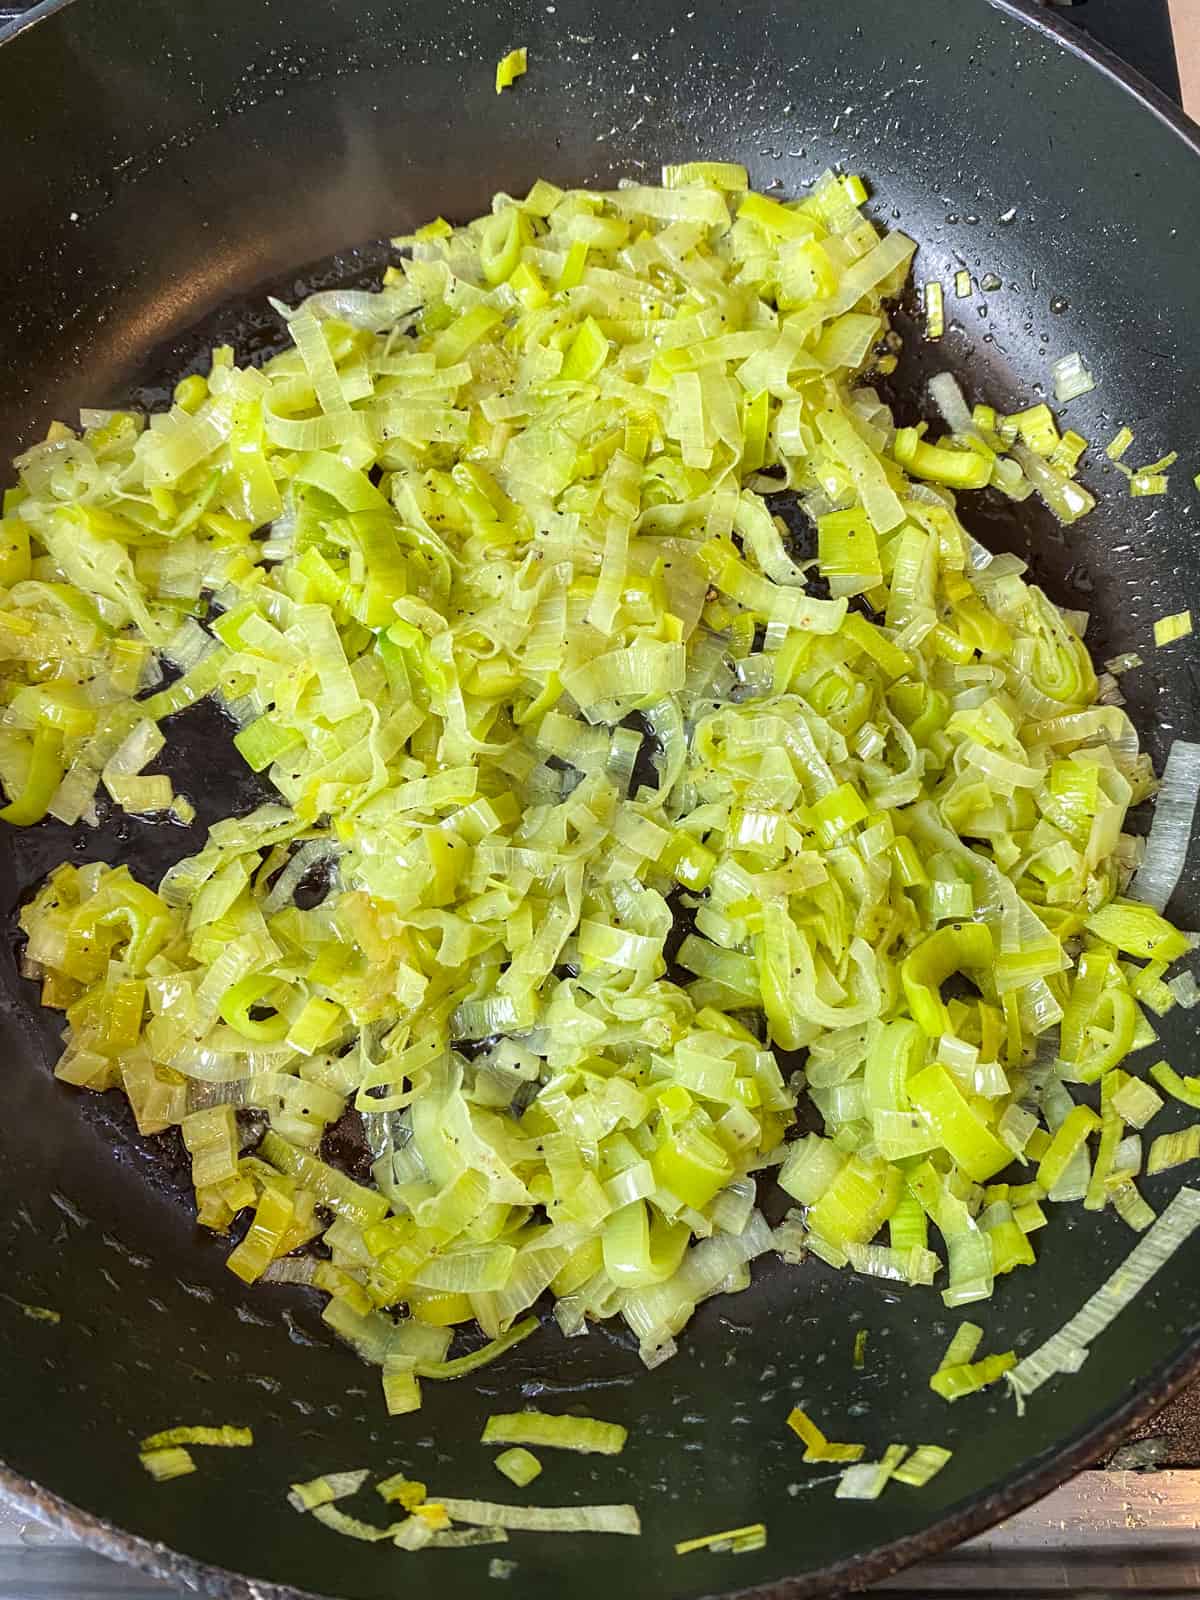 Saute the sliced leeks until softened but not browned.